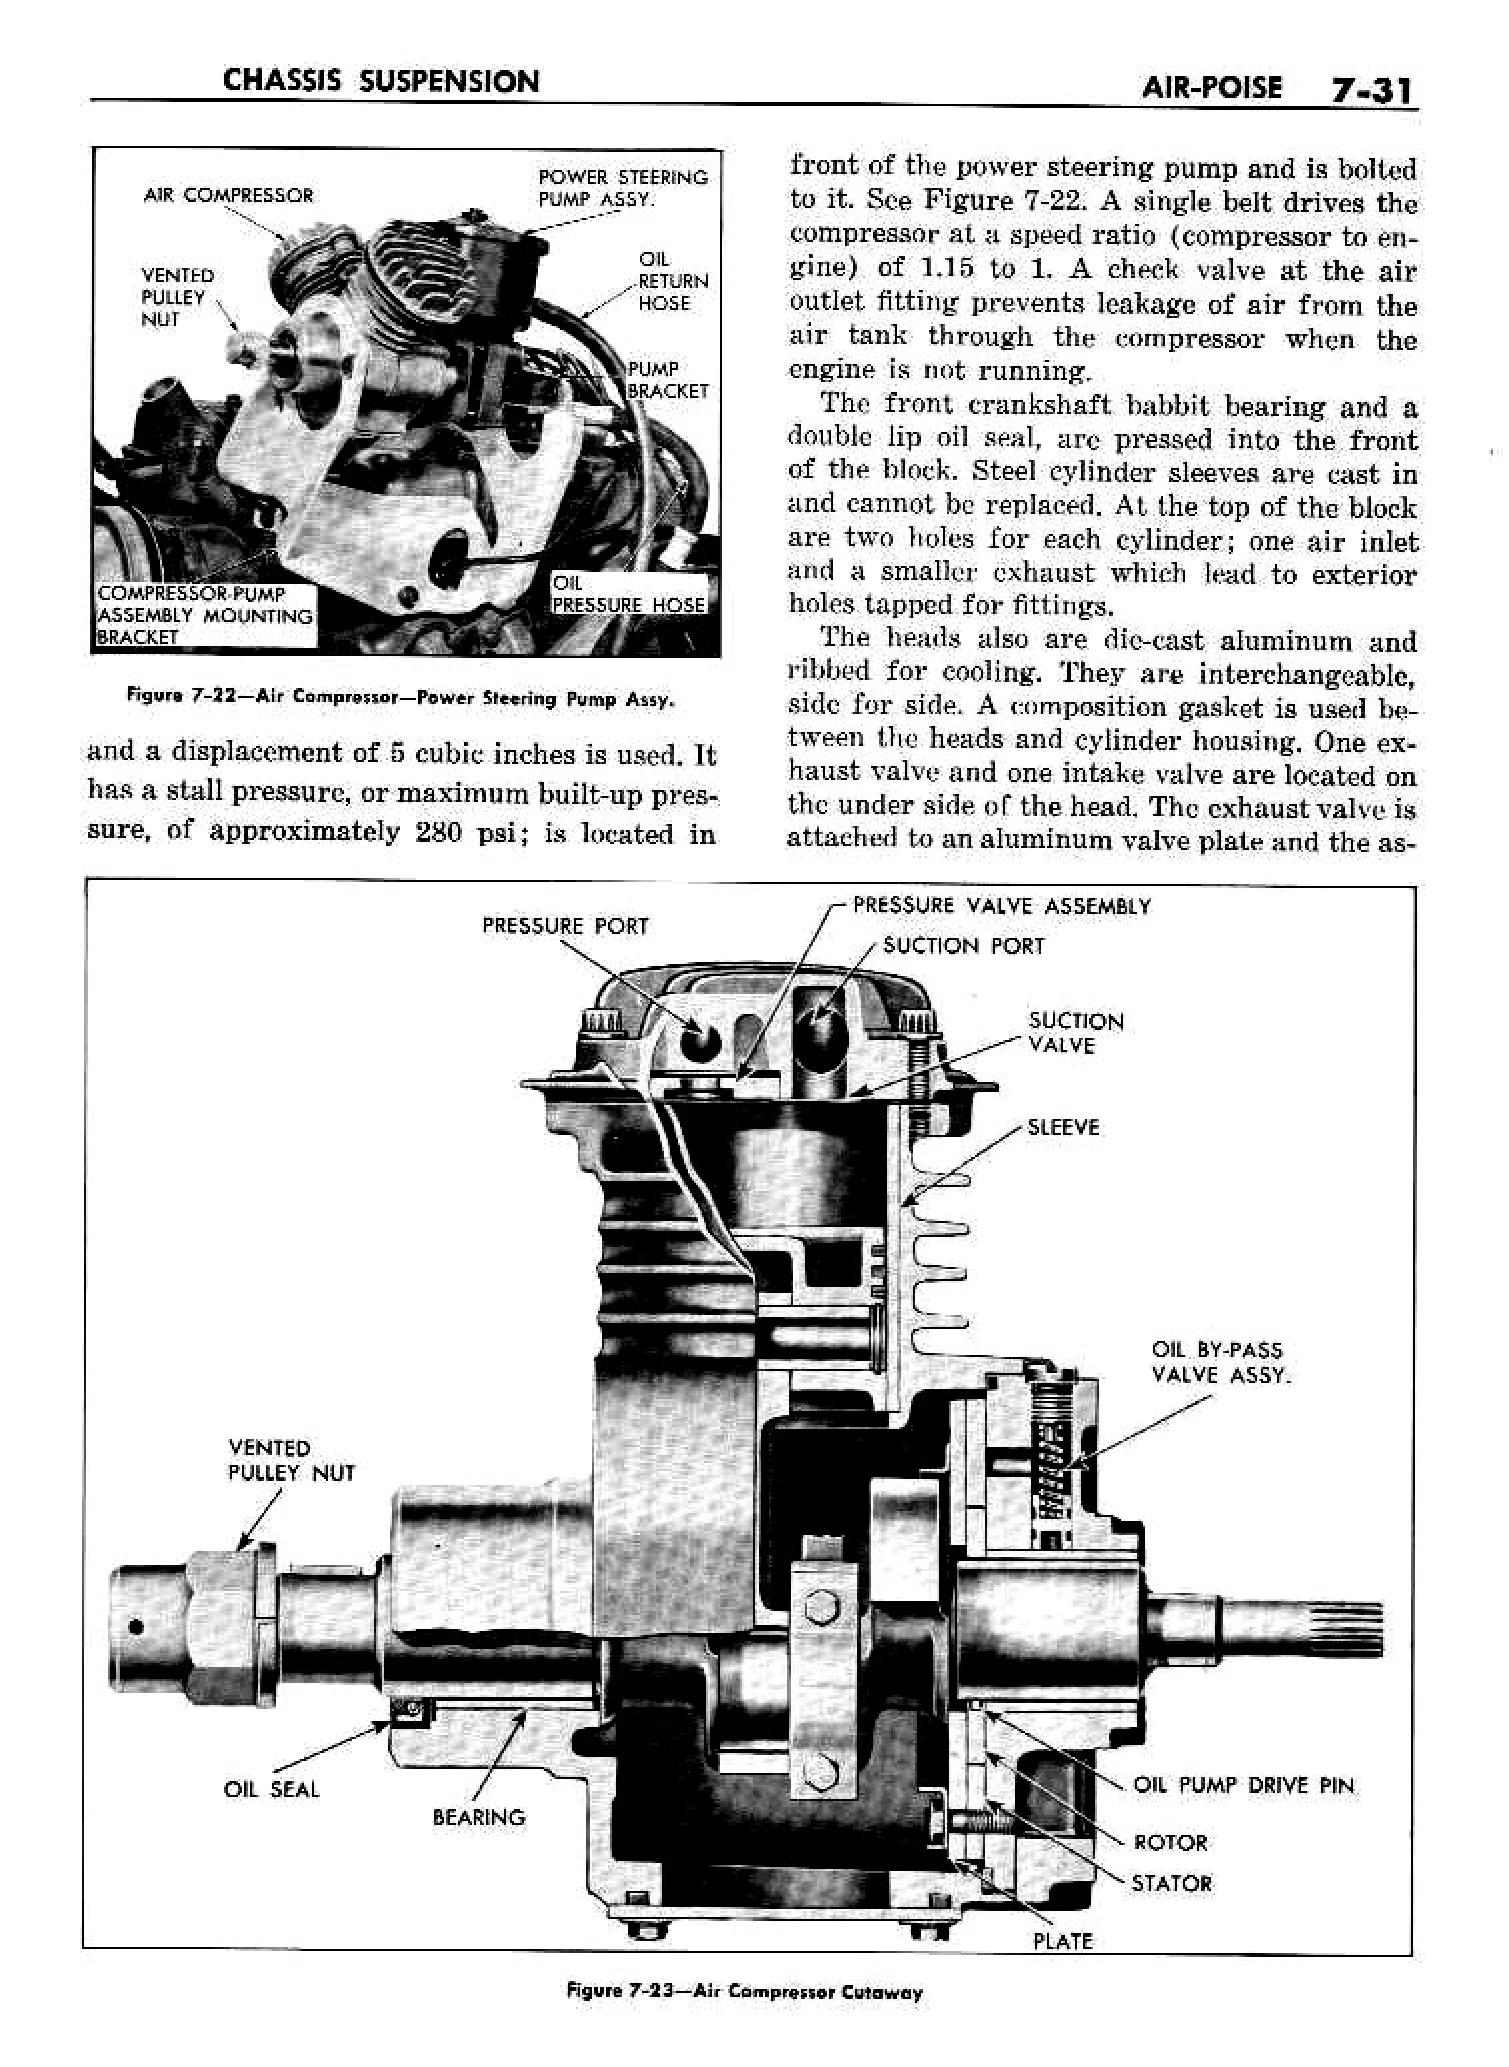 n_08 1958 Buick Shop Manual - Chassis Suspension_31.jpg